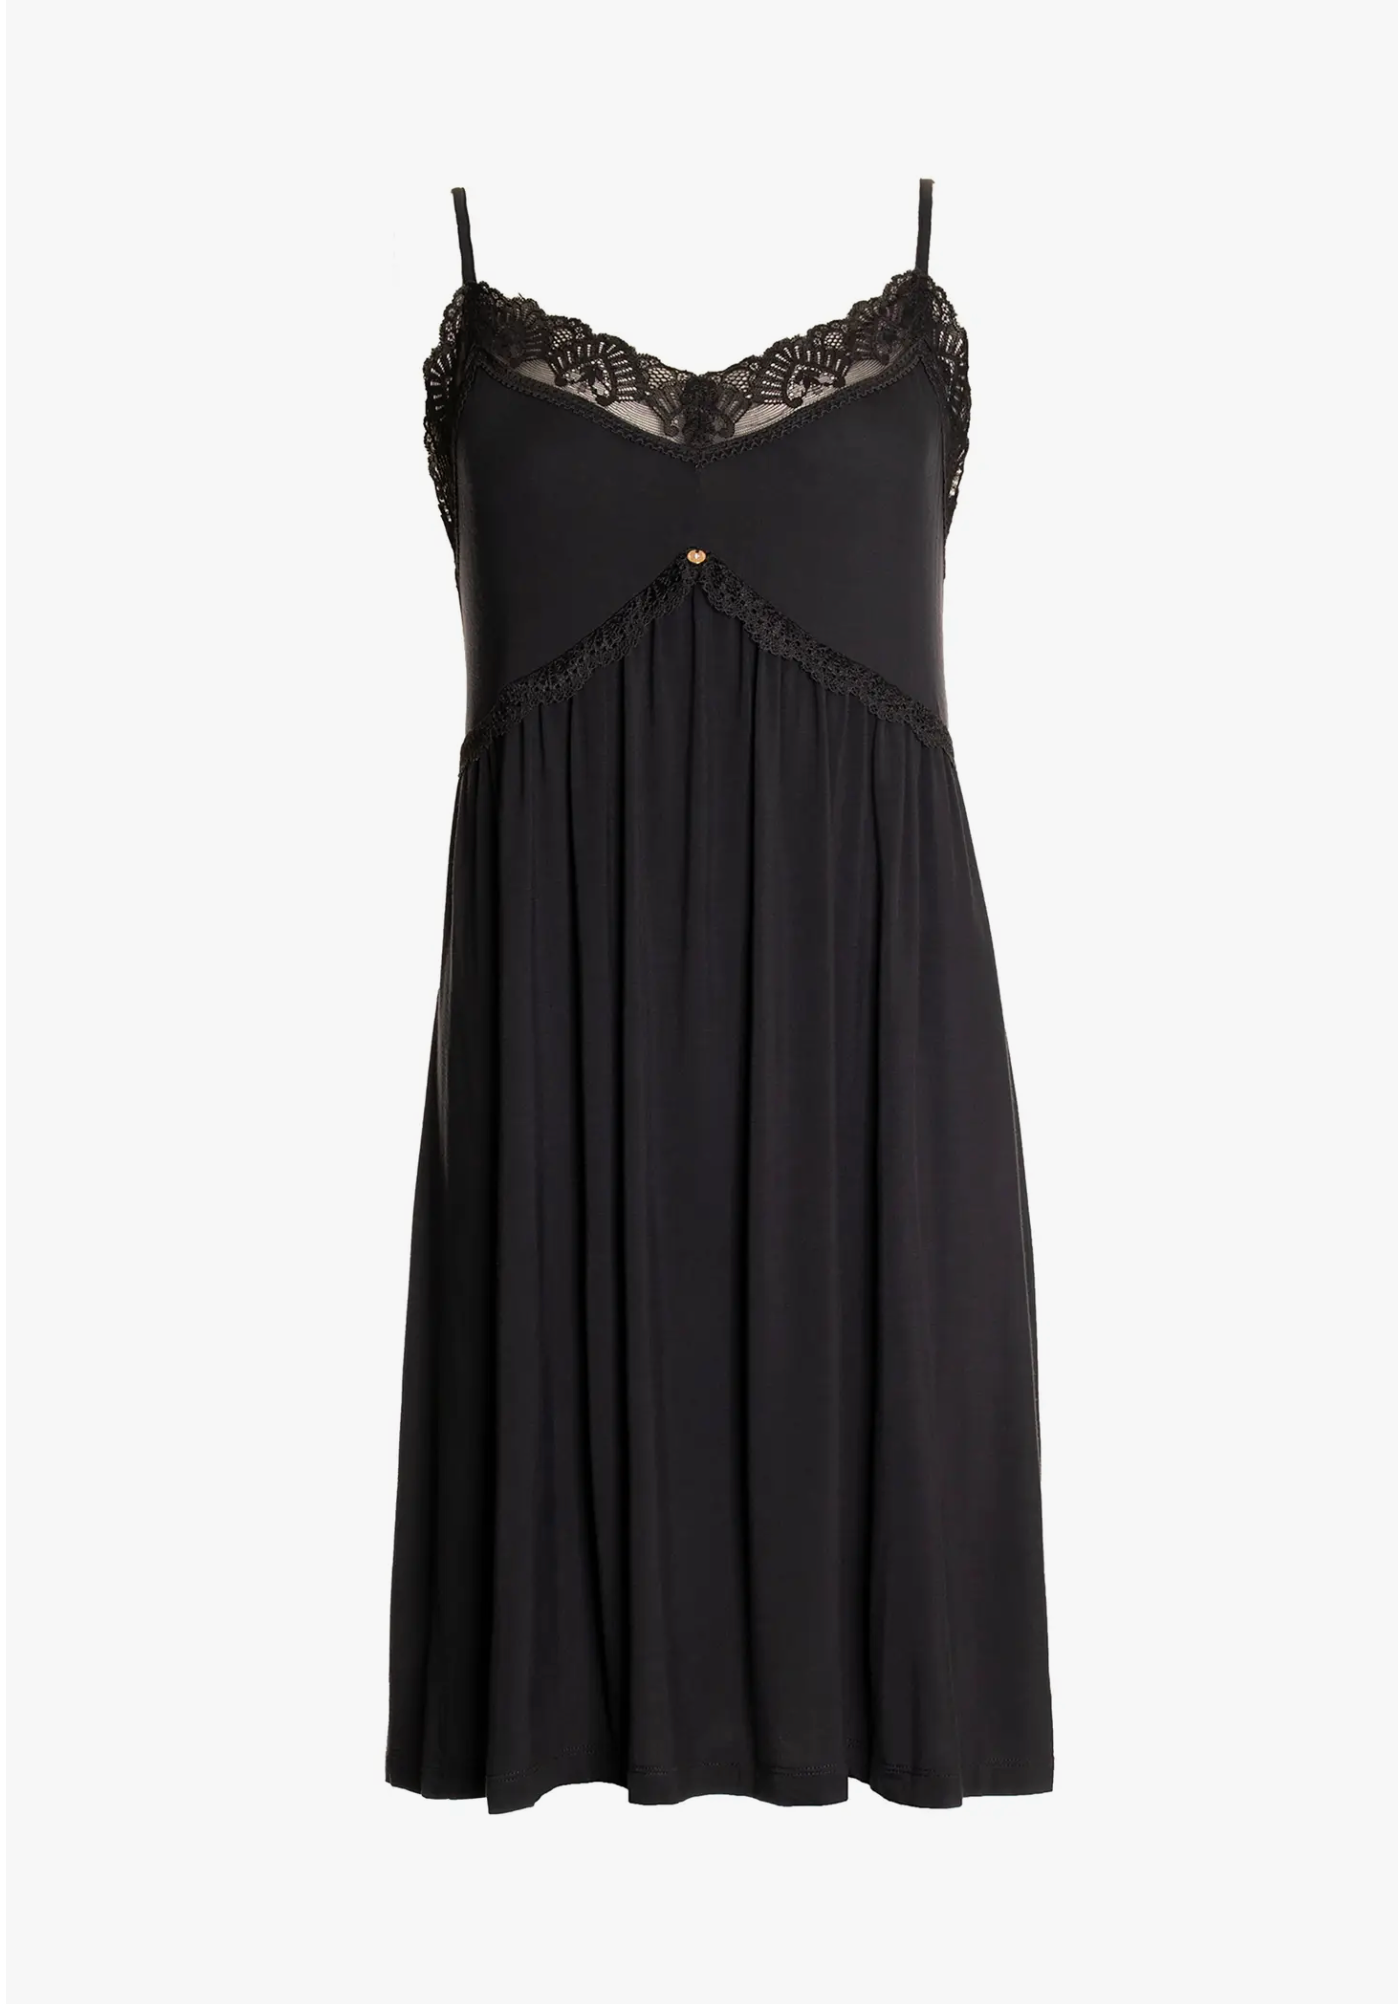 Bamboo Lace Chemise Nightie in Raven